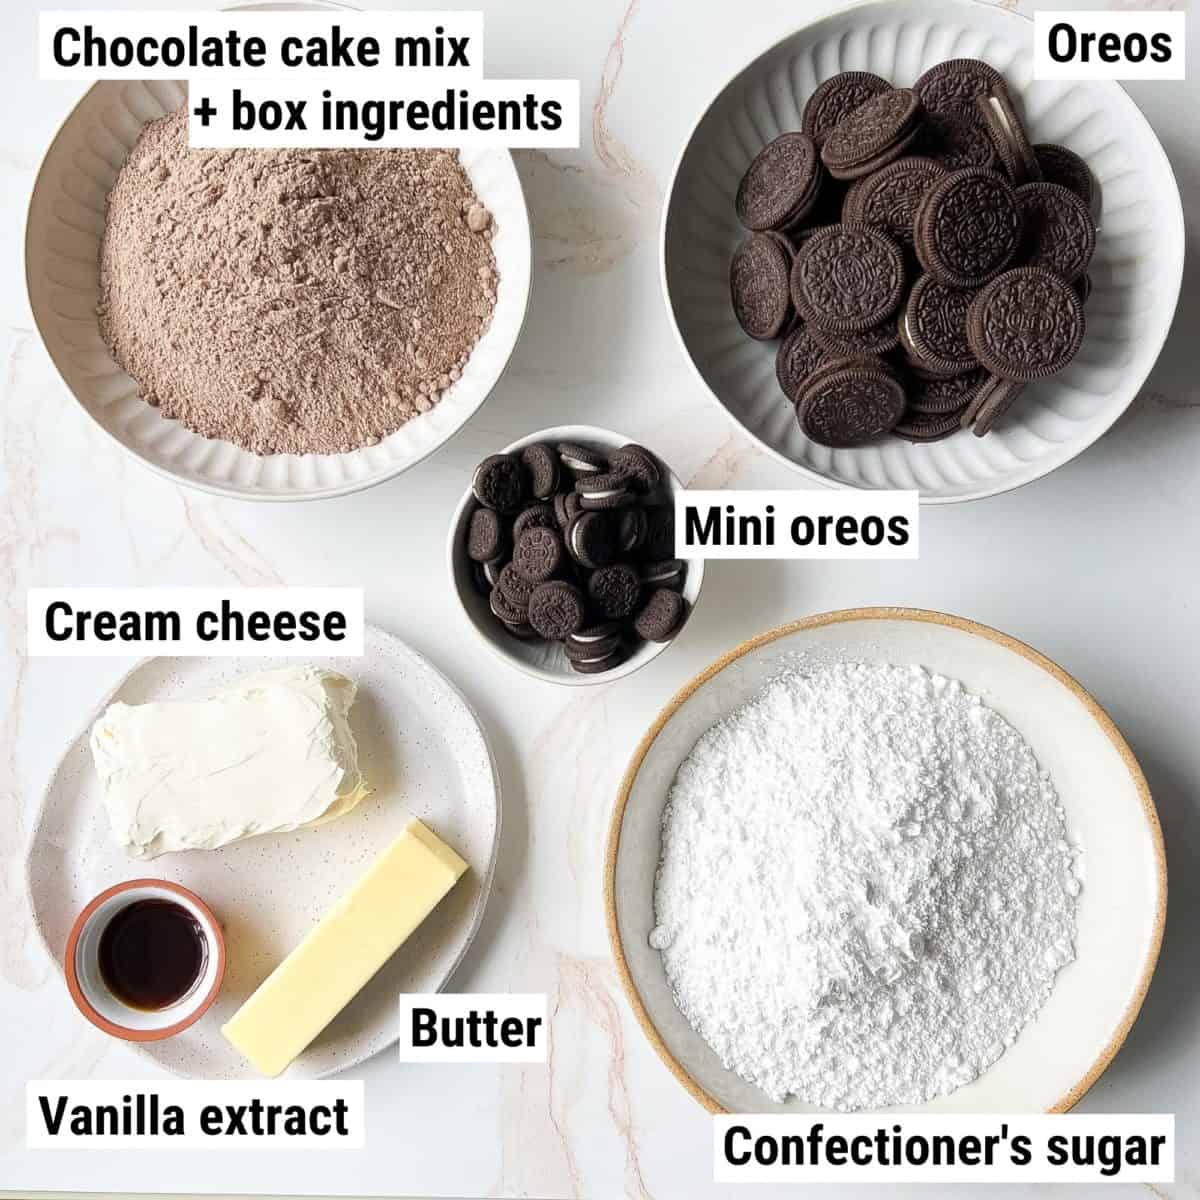 The ingredients used to make Oreo cupcakes spread out on a table.